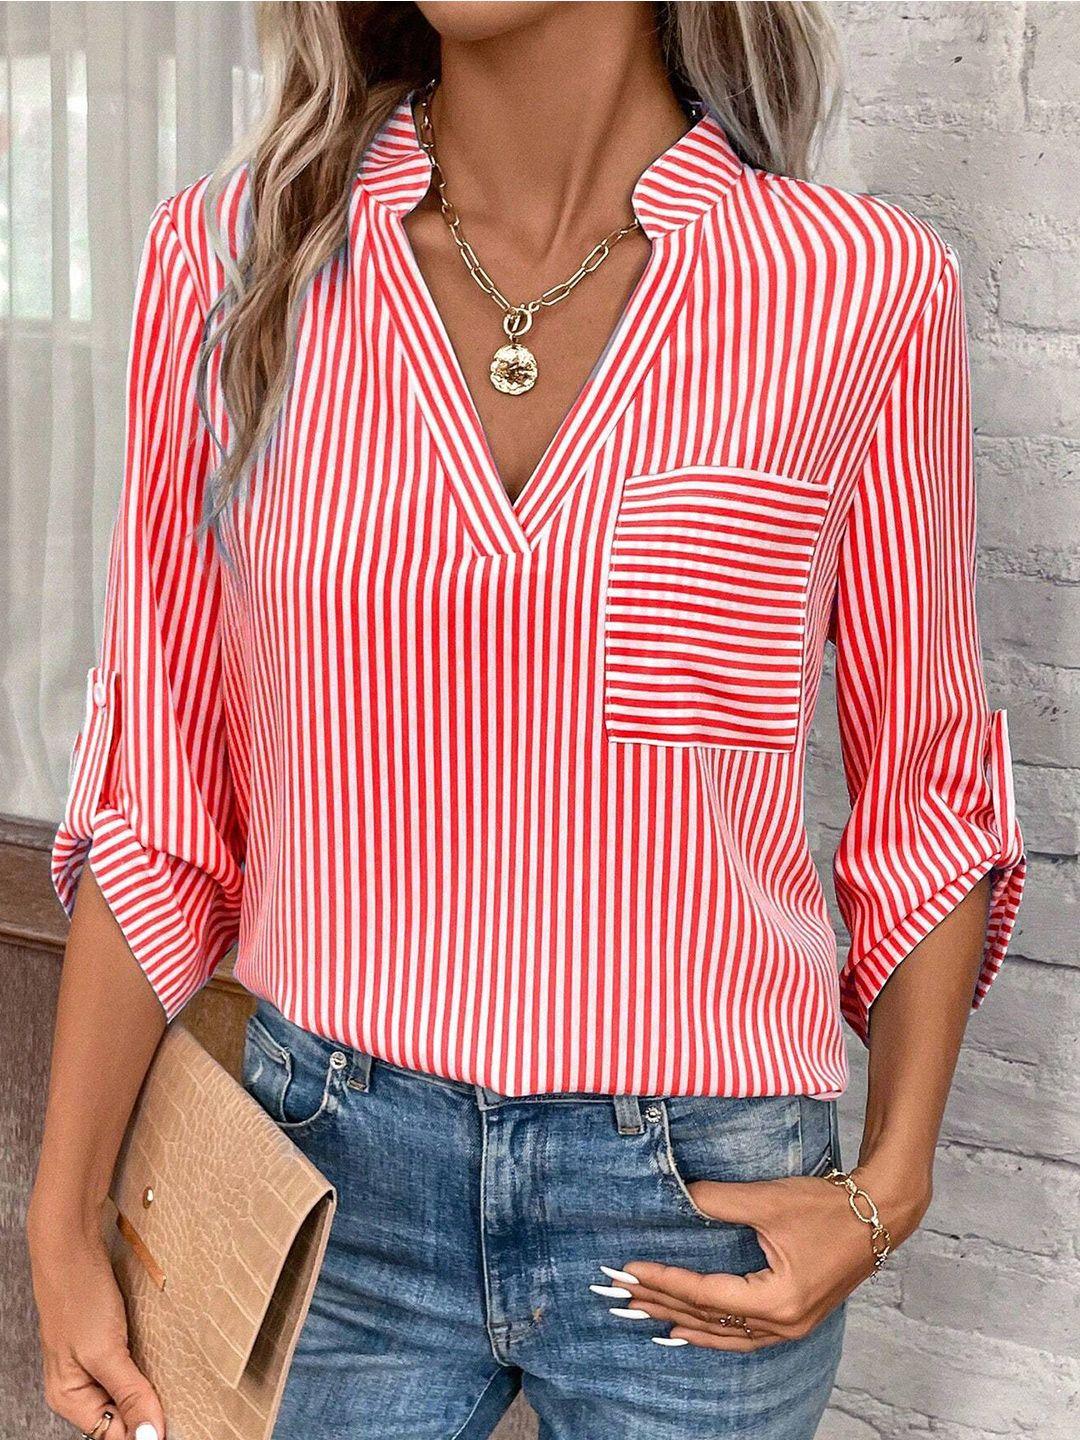 stylecast striped mandarin collar roll-up sleeves shirt style top